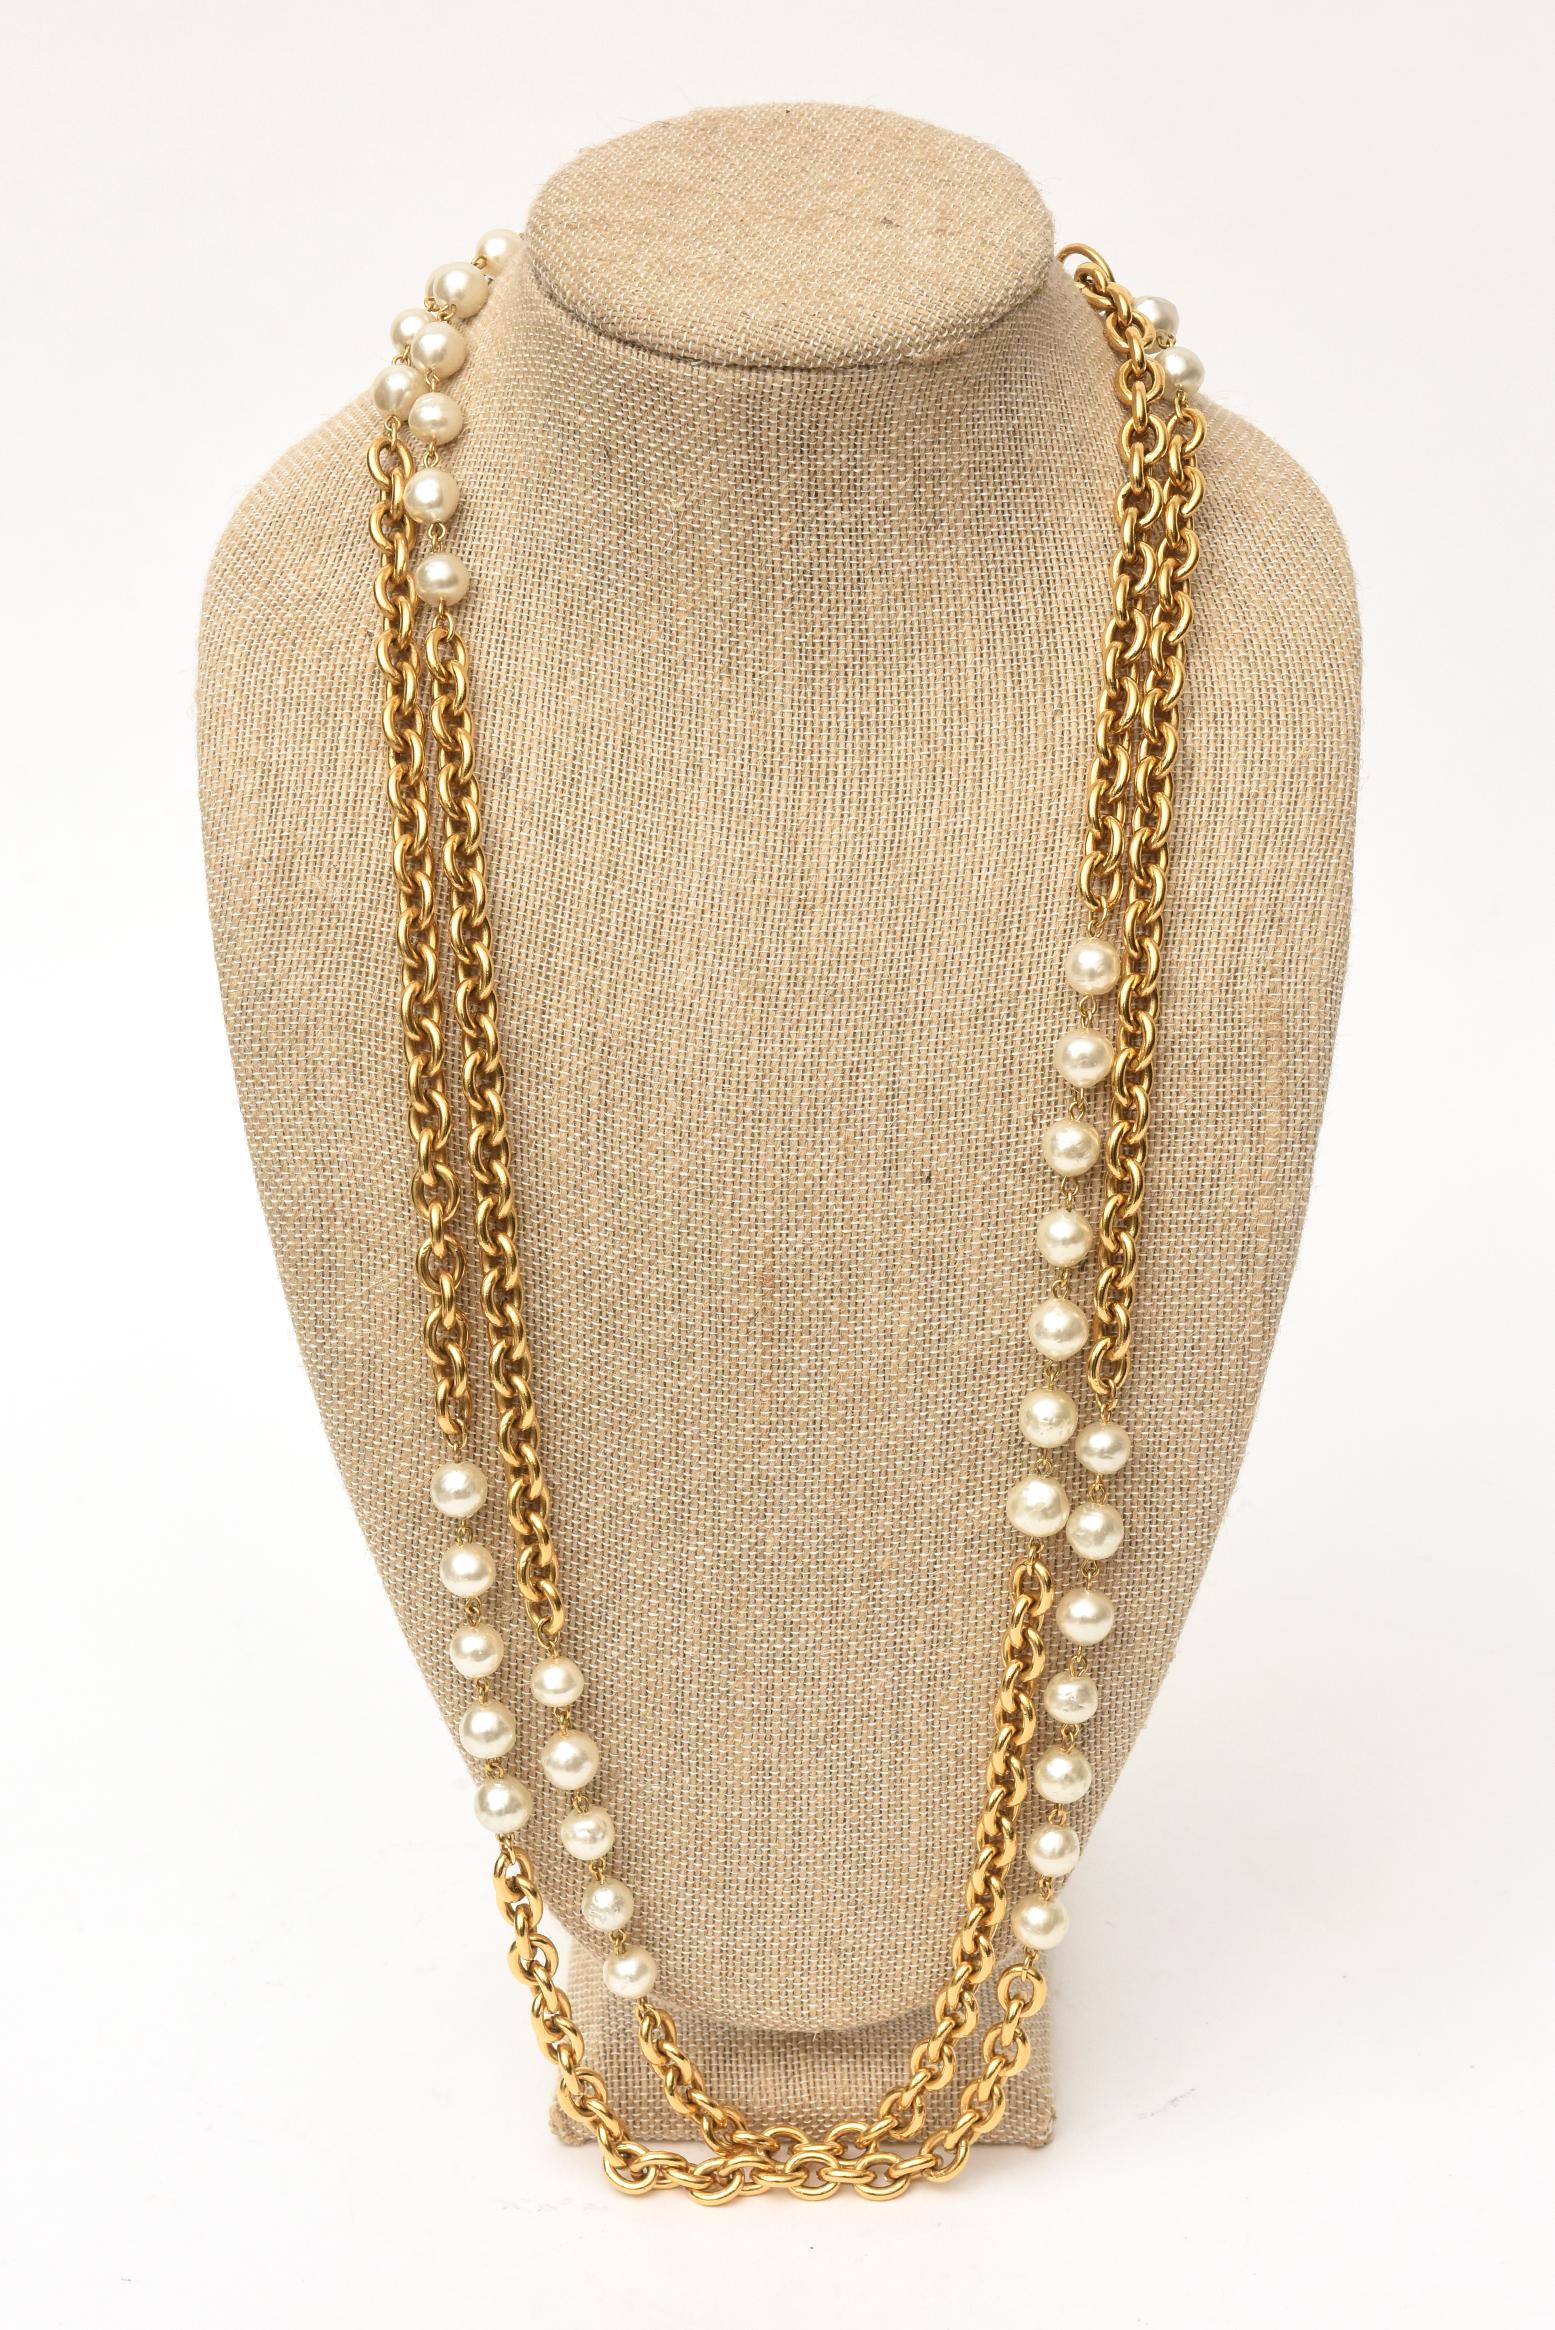 Ball Cut Chanel Chain and Faux Pearl Long Double Strand Necklace